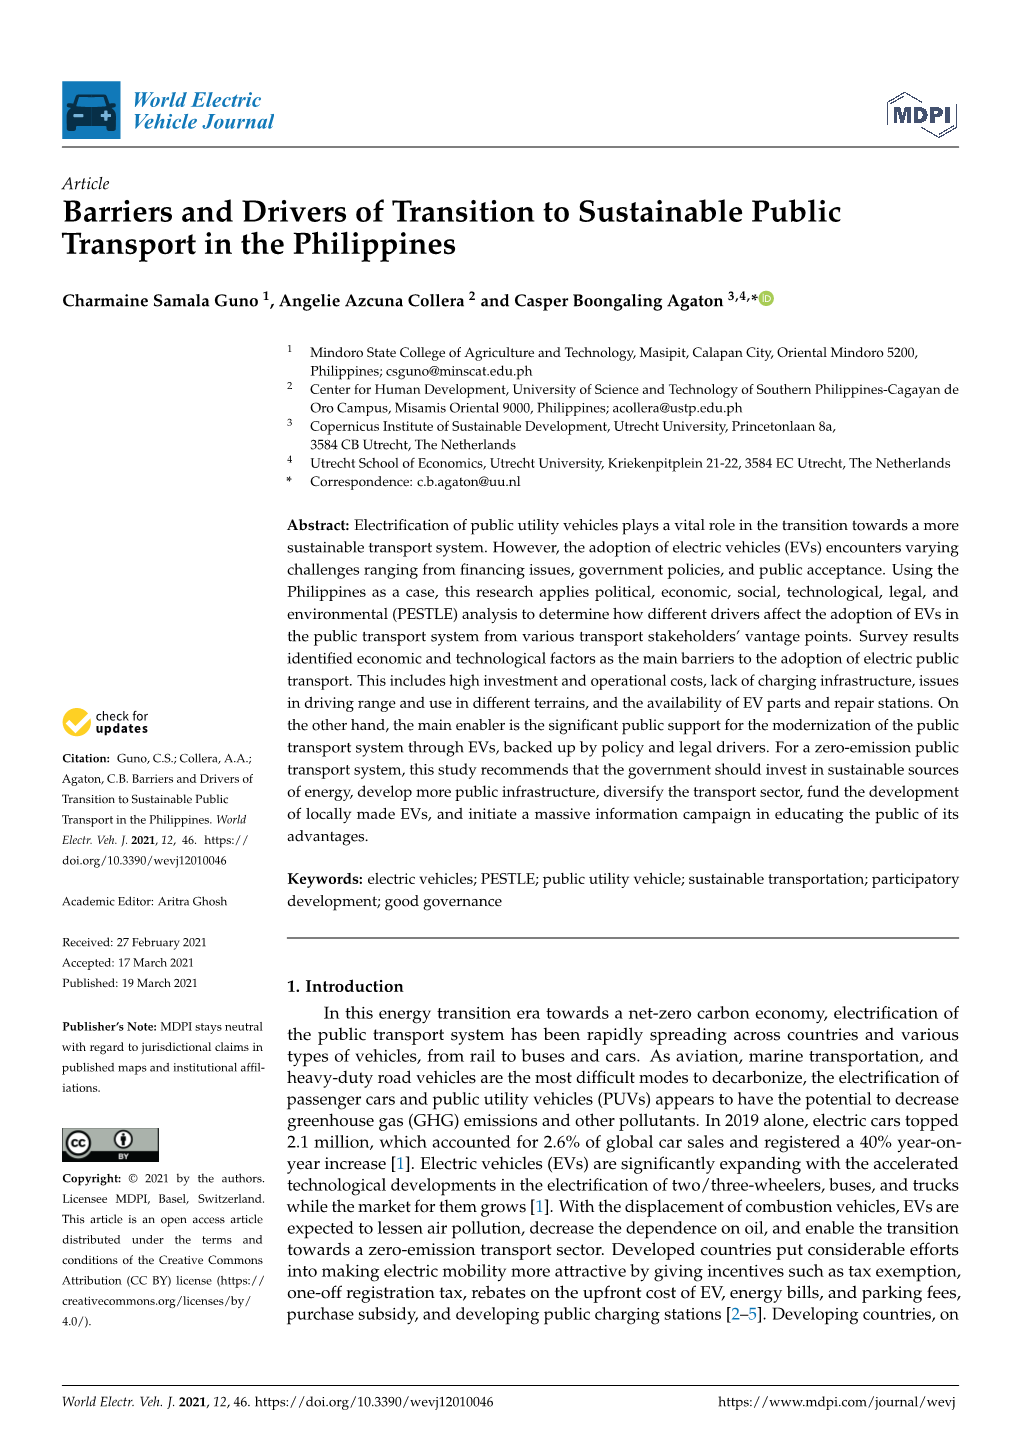 Barriers and Drivers of Transition to Sustainable Public Transport in the Philippines